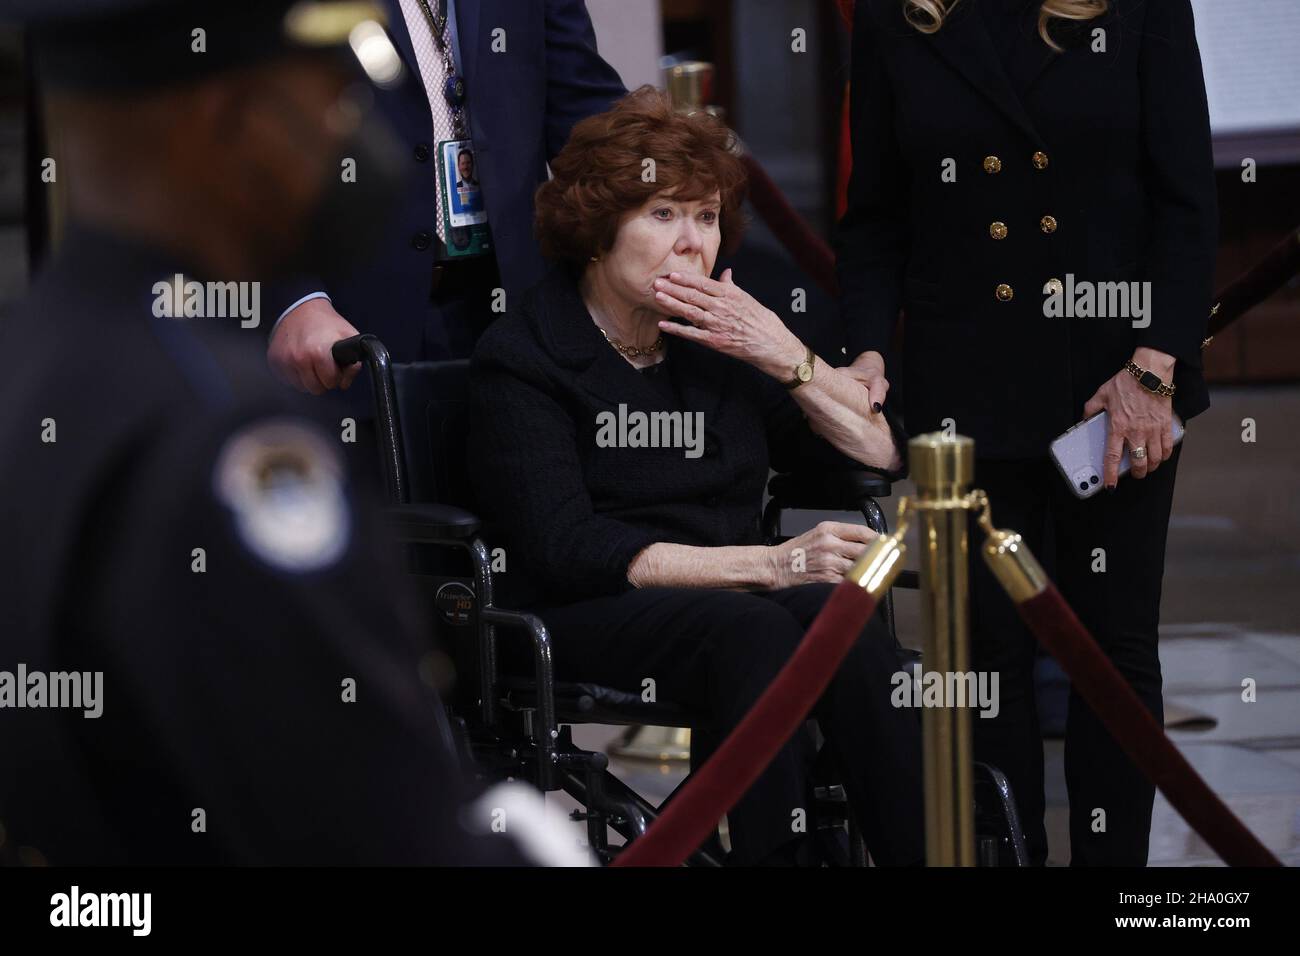 Washington, United States. 09th Dec, 2021. Betty Meyer, former secretary to the late Senate Majority Leader Bob Dole, attends a Congressional memorial service for Dole at the U.S. Capitol in Washington DC, on Thursday, December 9, 2021. Dole, who served on Capitol Hill for 36 years, died in his sleep on December 5 at the age of 98. Pool photo by Jonathan Ernst/UPI Credit: UPI/Alamy Live News Stock Photo